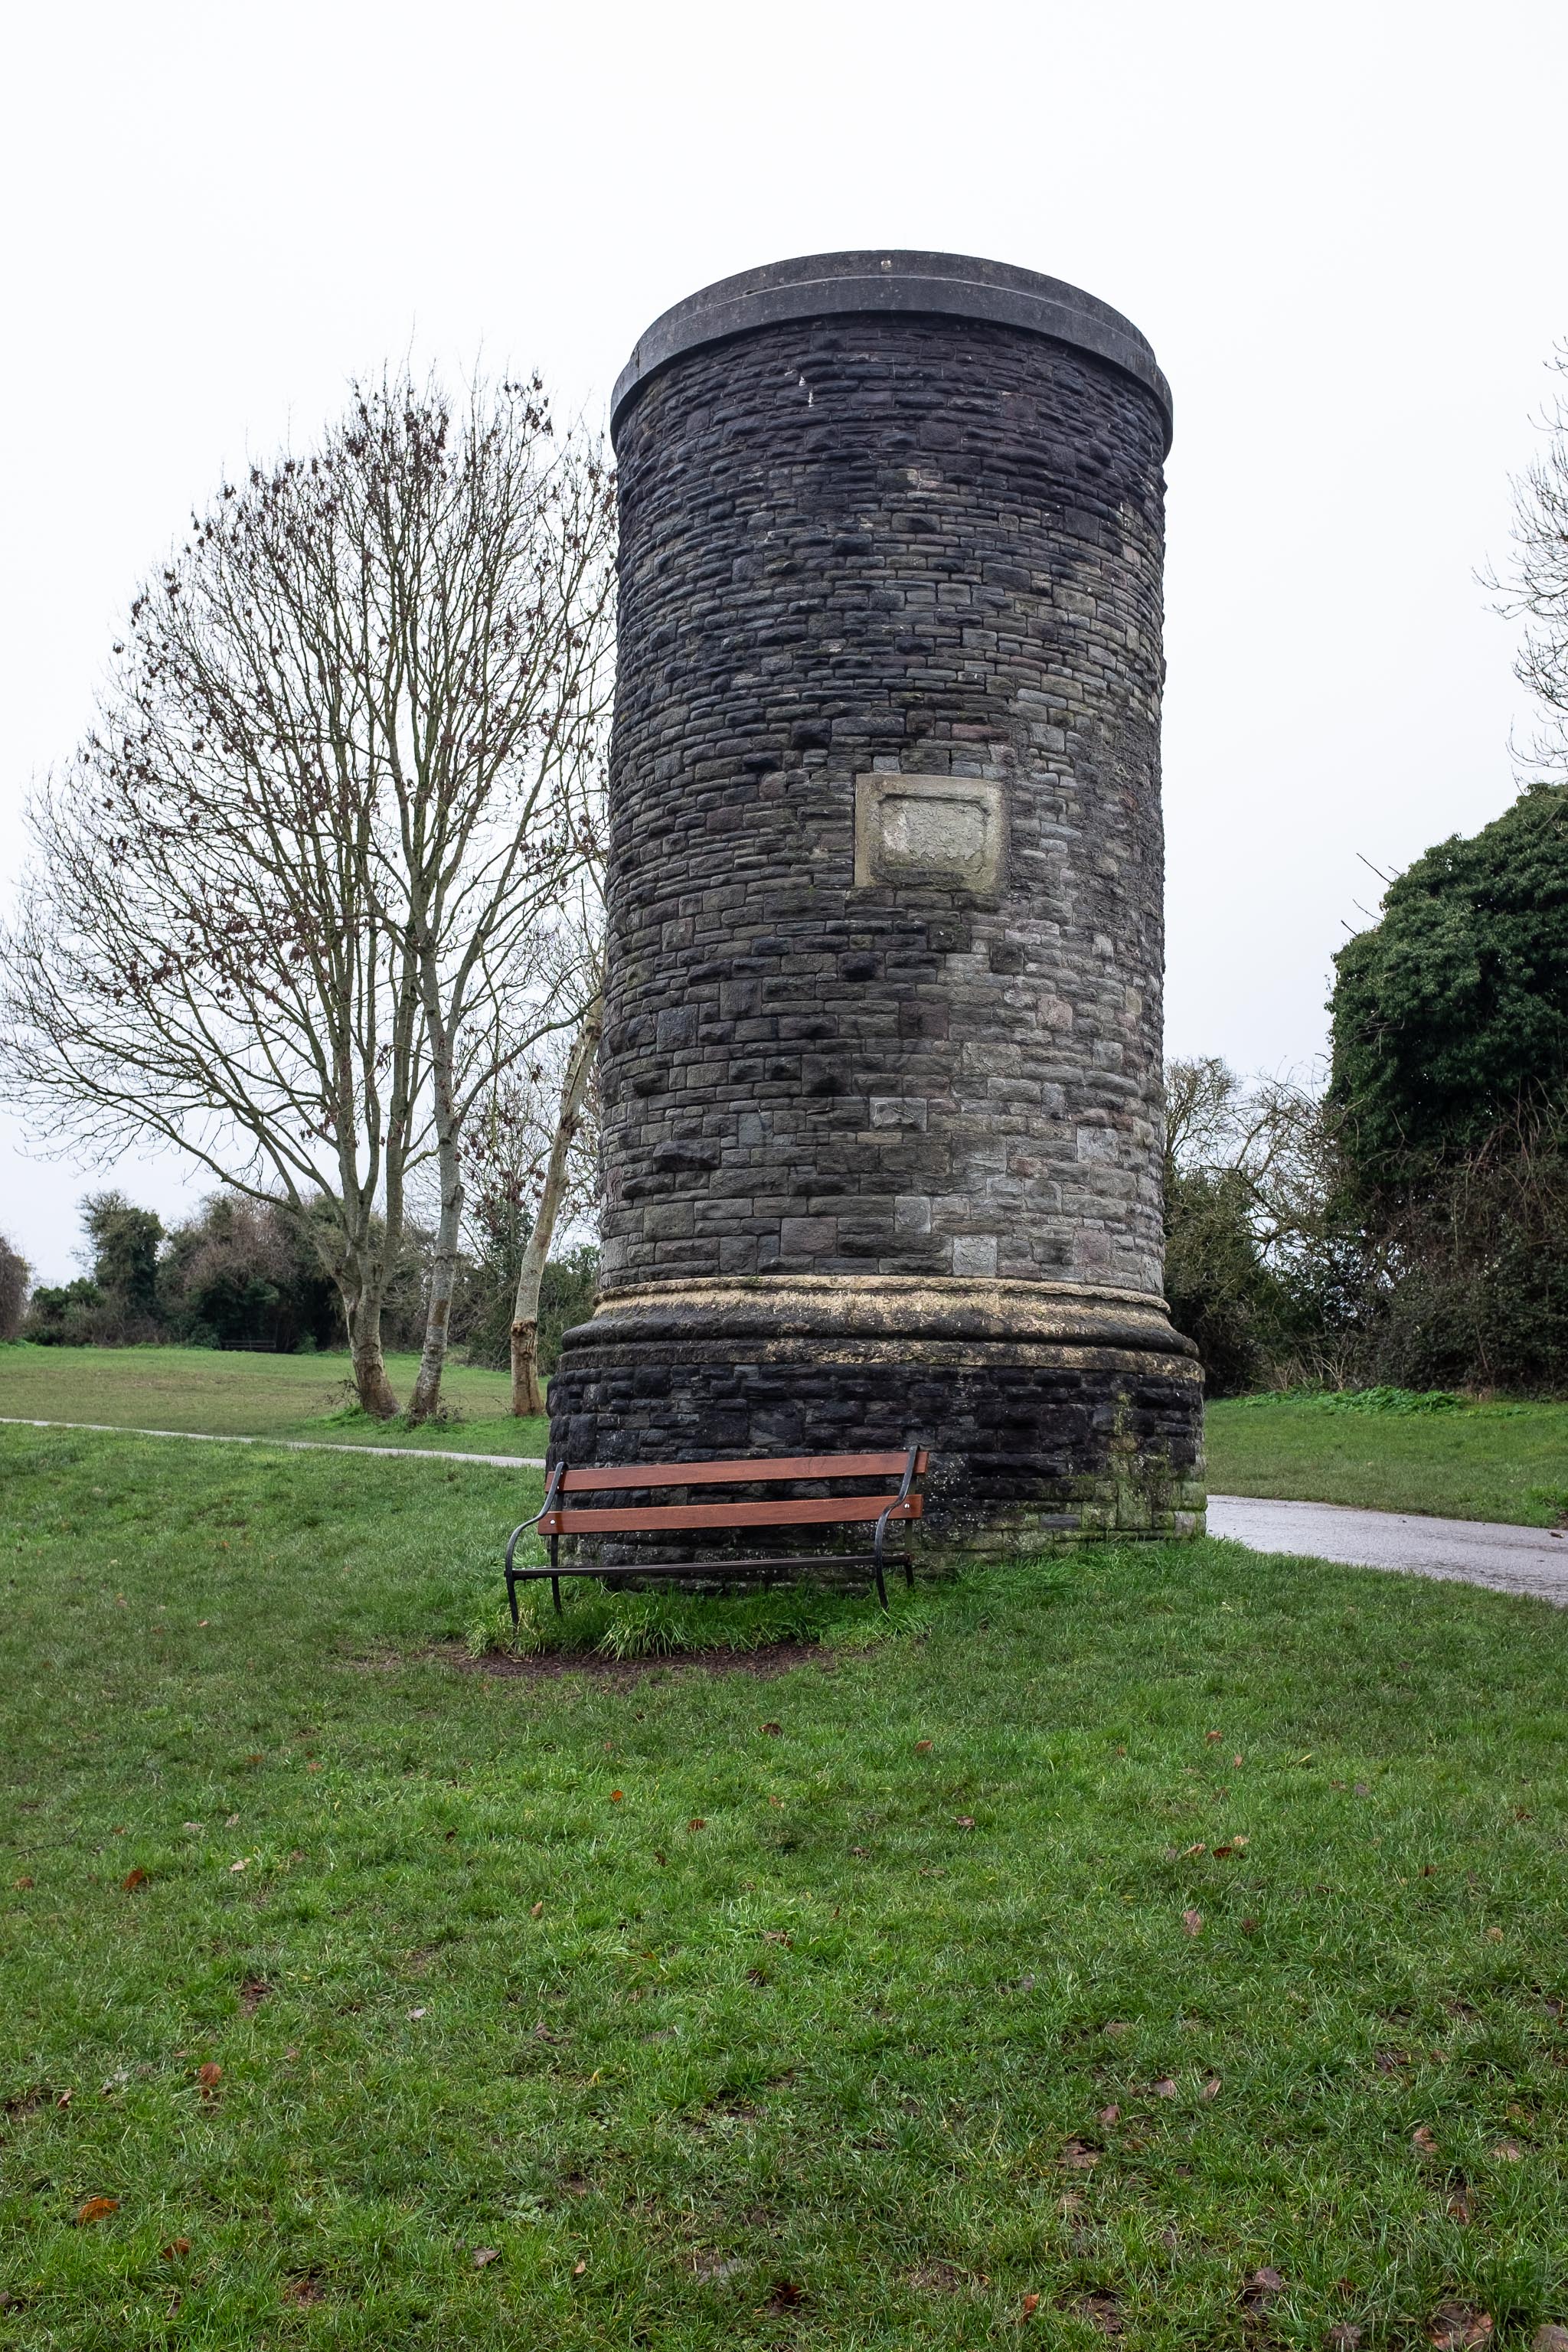 Ventilation Shaft
This is a ventilation shaft for the Clifton Down Tunnel. The railway tunnel was opened in 1877, and is still in use. According to this page (which...